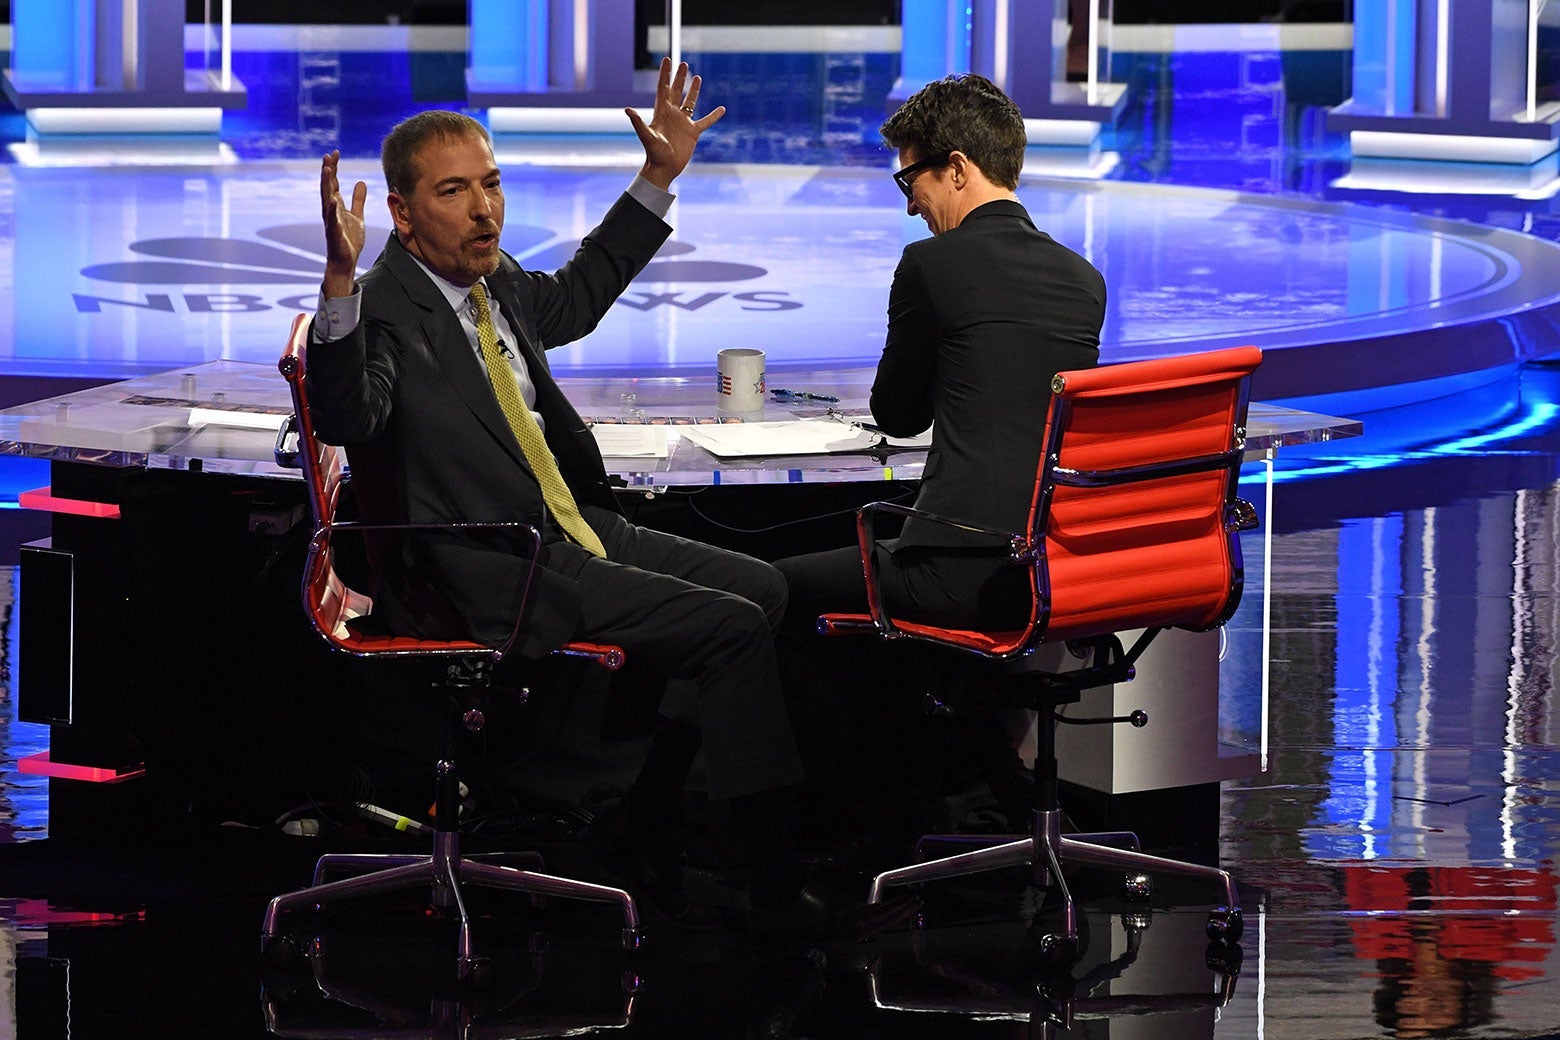 Chuck Todd turns around to face the audience, arms raised in frustration, next to Rachel Maddow. They're both sitting at a desk on the debate stage.